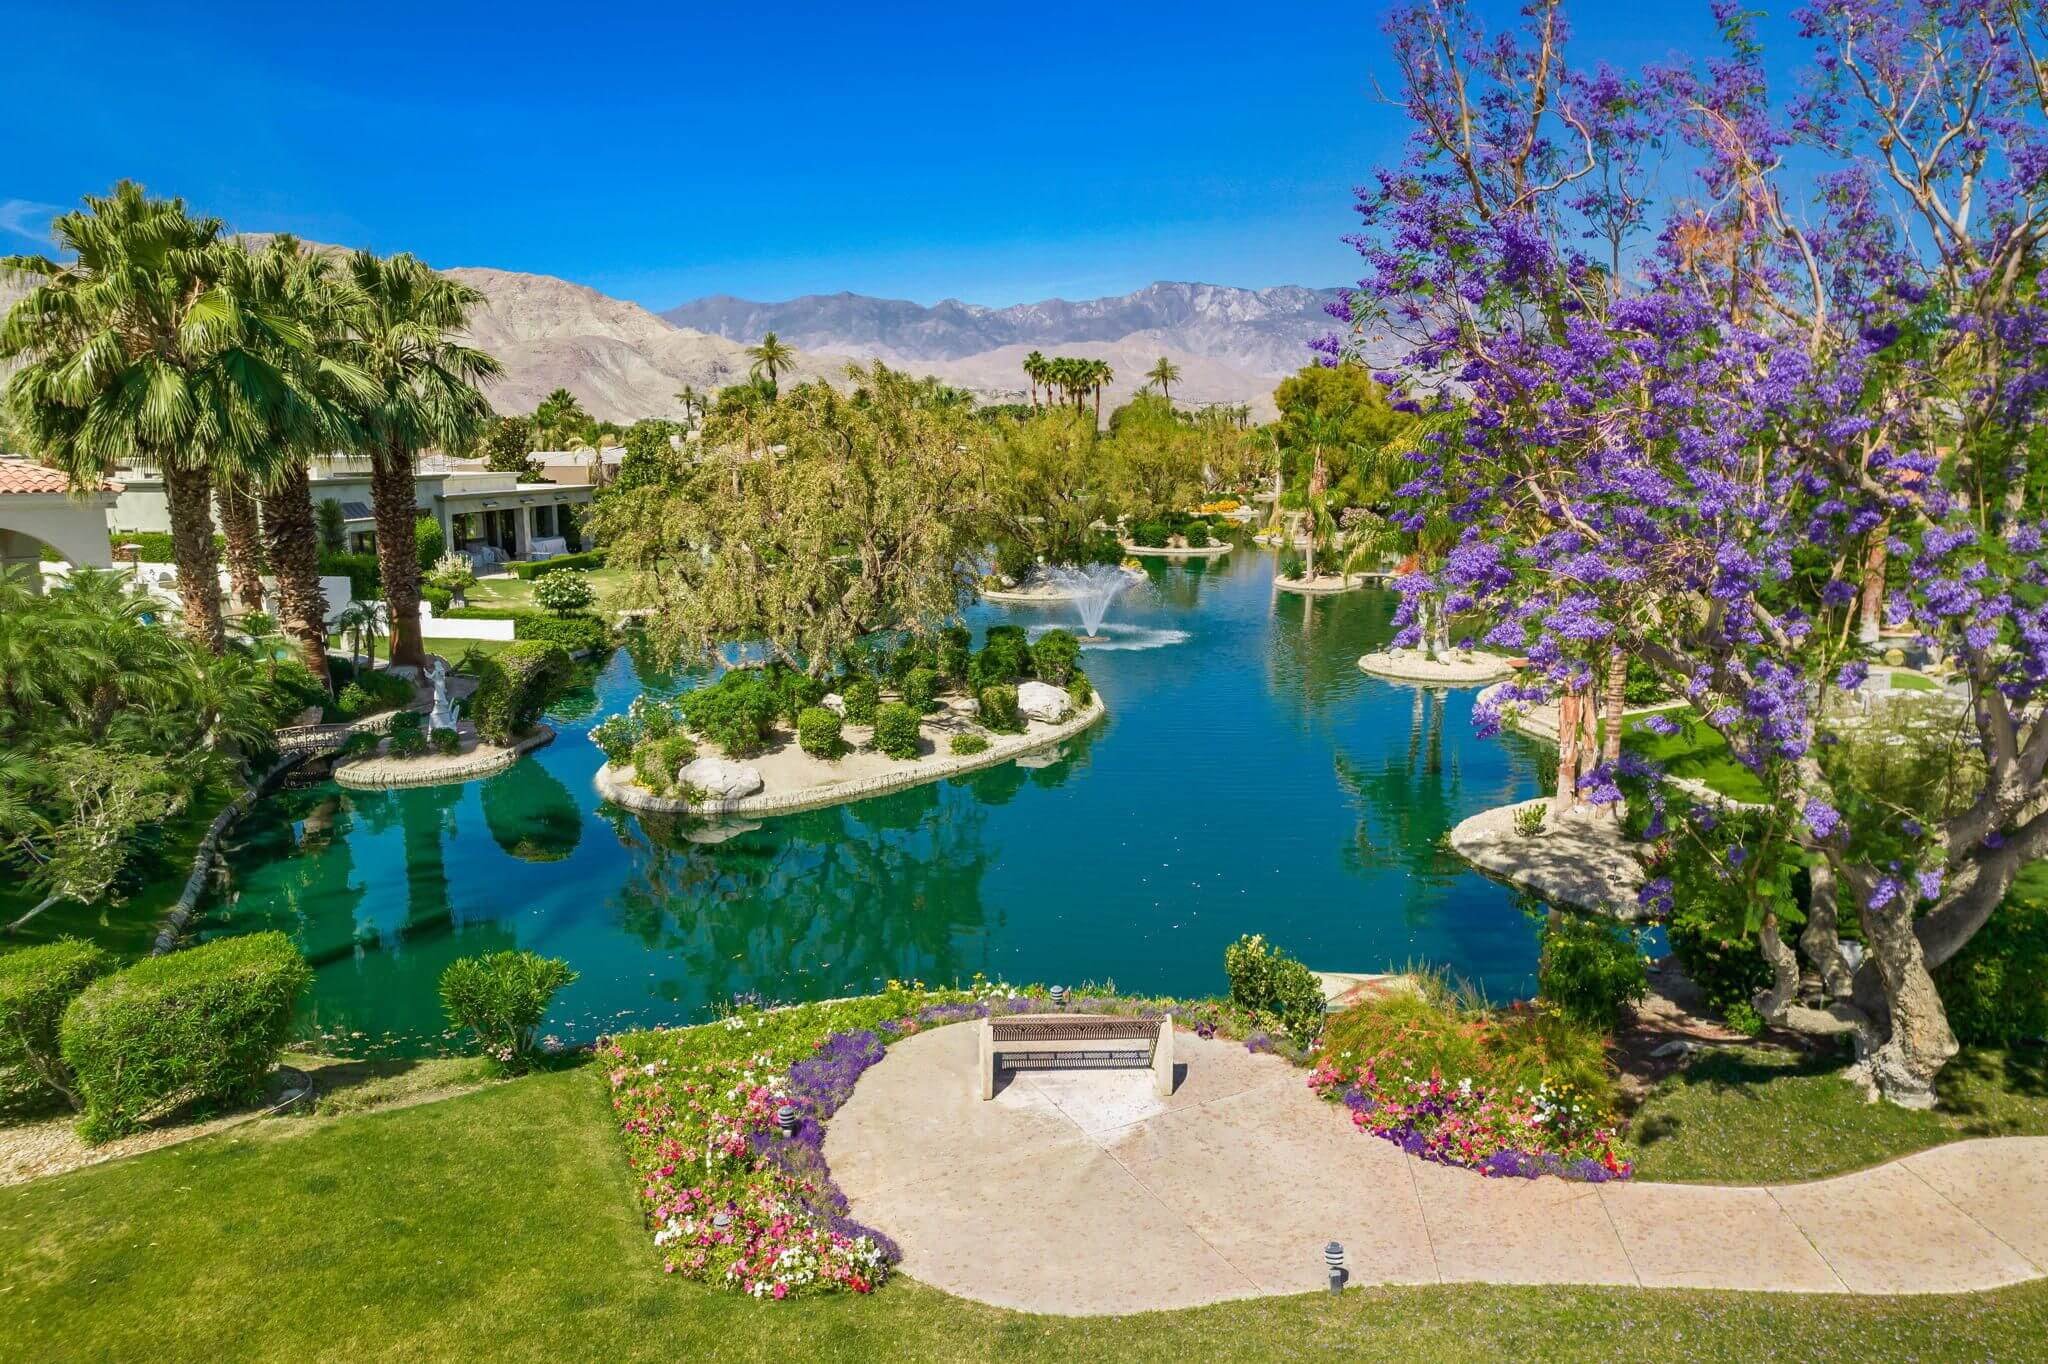 Waterford Rancho Mirage 92270